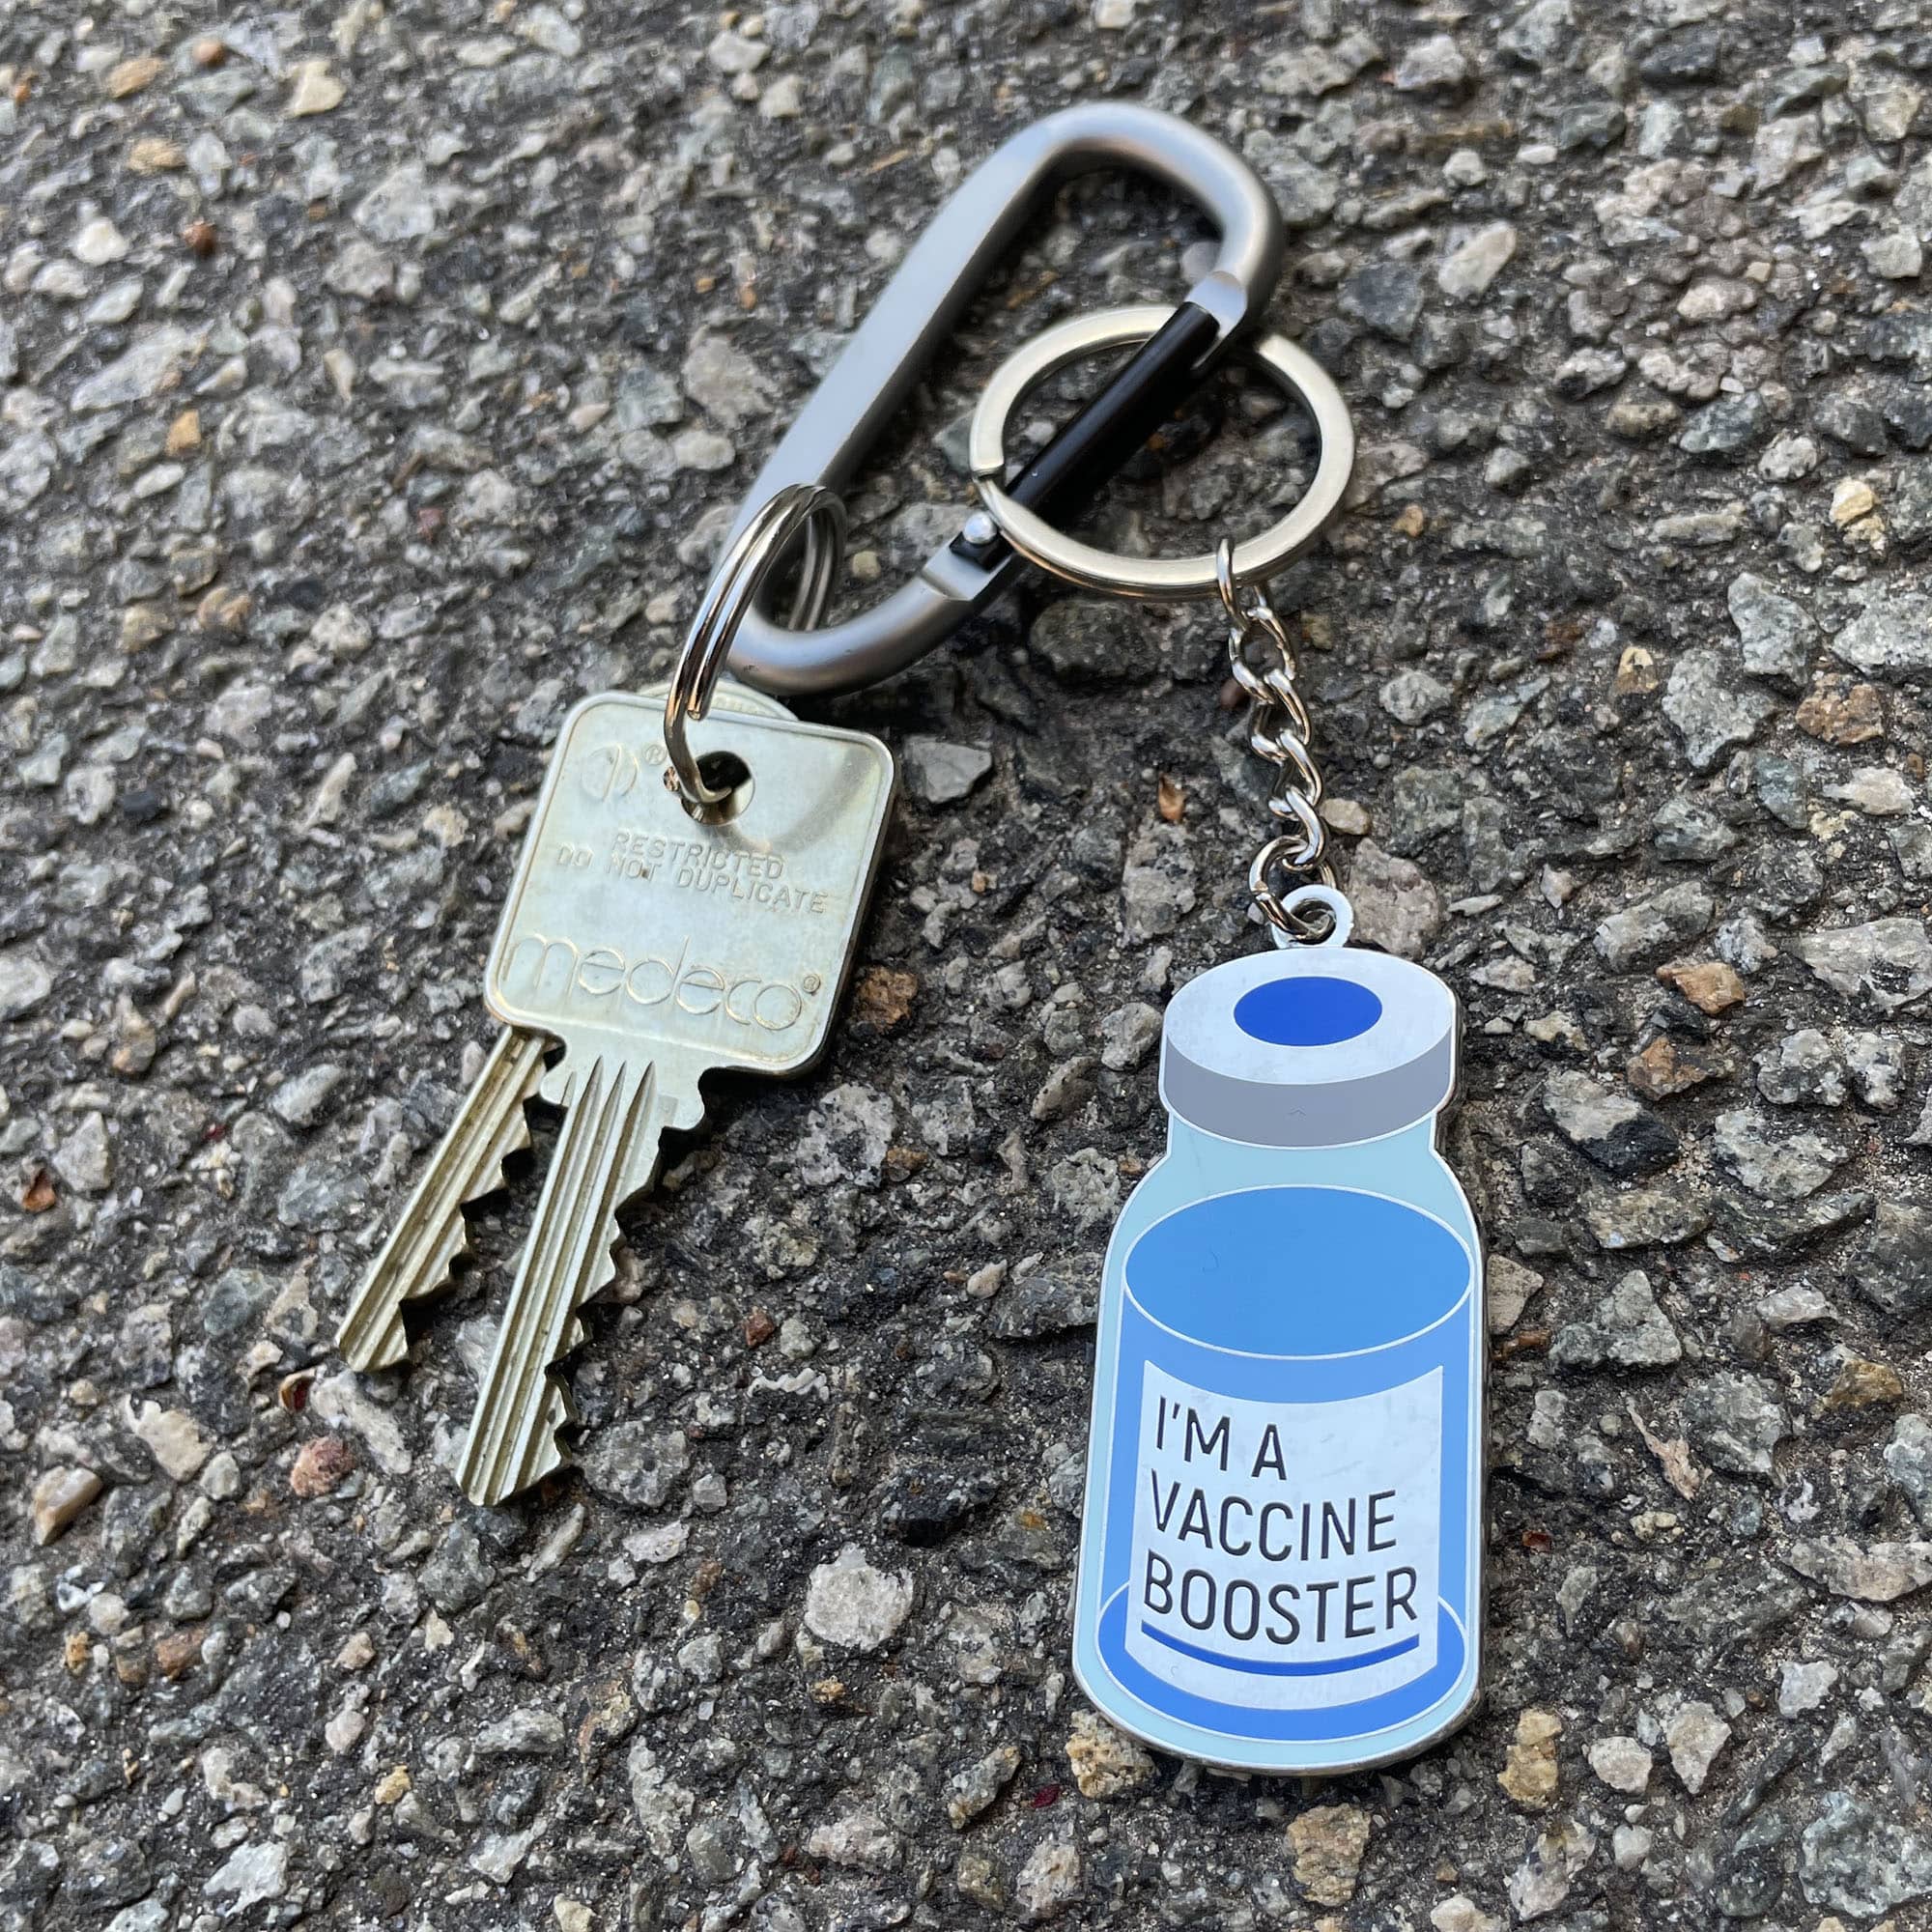 I'm a Vaccine Booster Vial Keychain